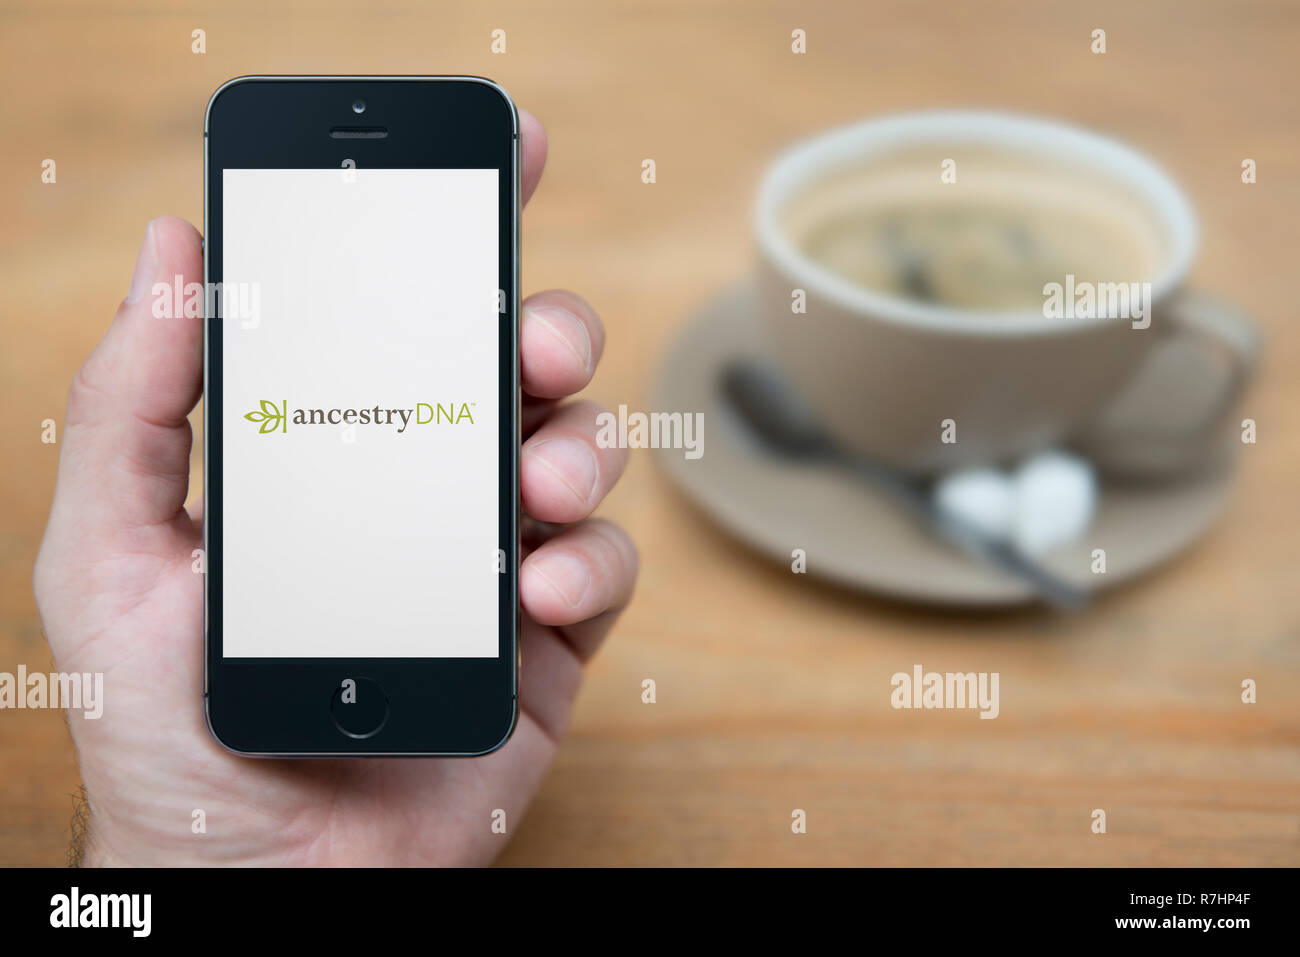 A man looks at his iPhone which displays the AncestryDNA logo (Editorial use only). Stock Photo